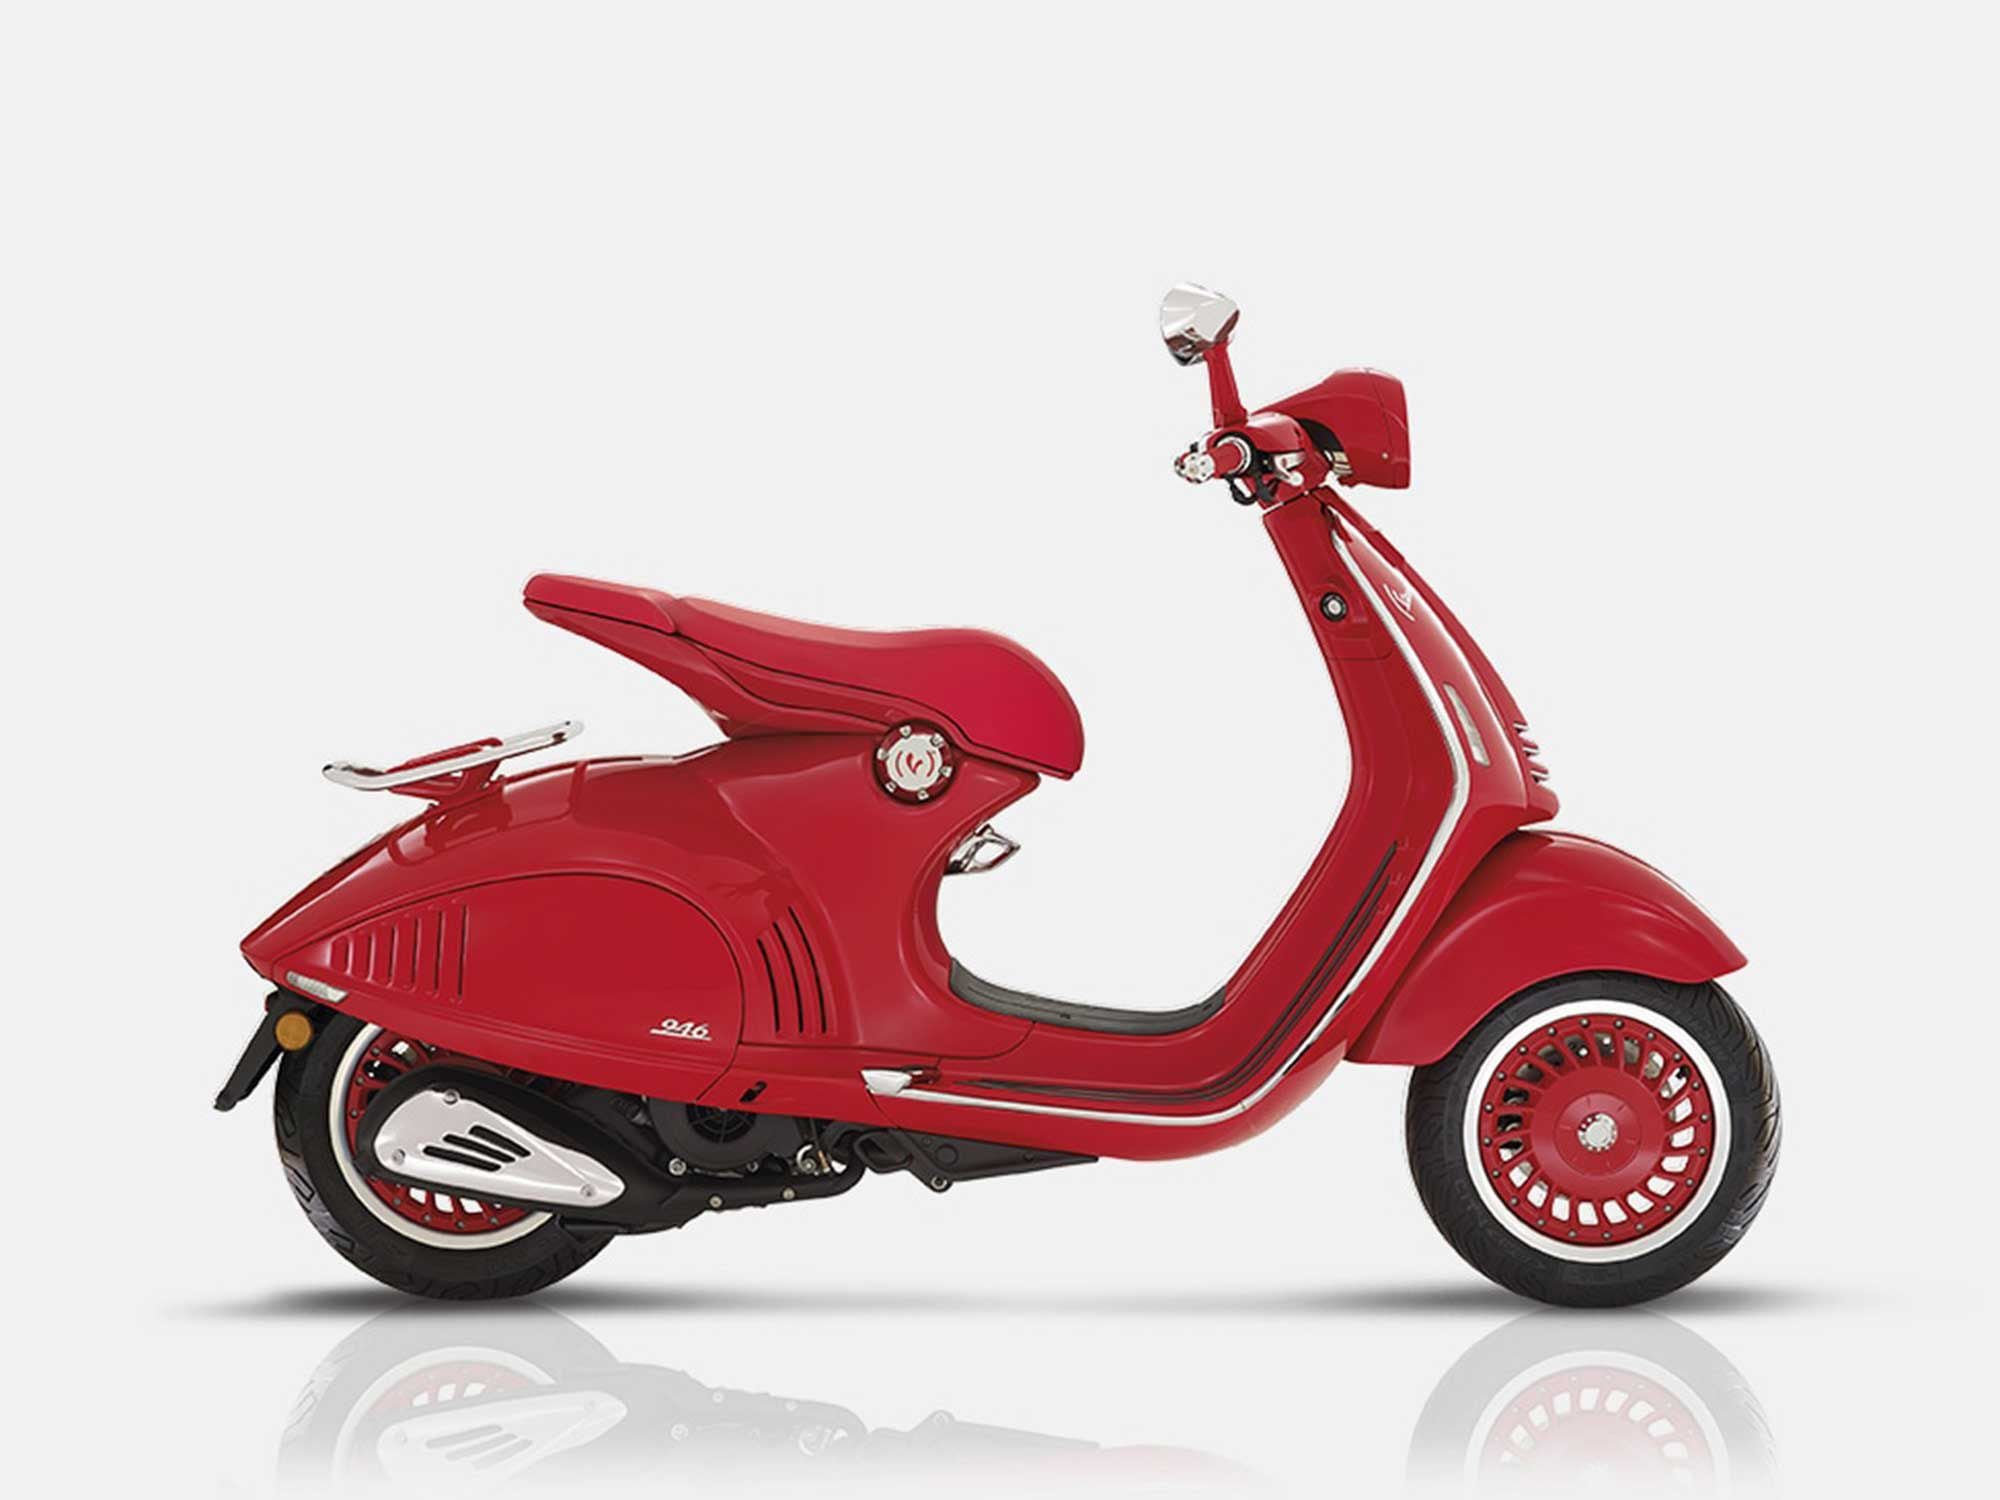 Vespa 946 Christian Dior Scooter Unveiled : Know Specs and Price